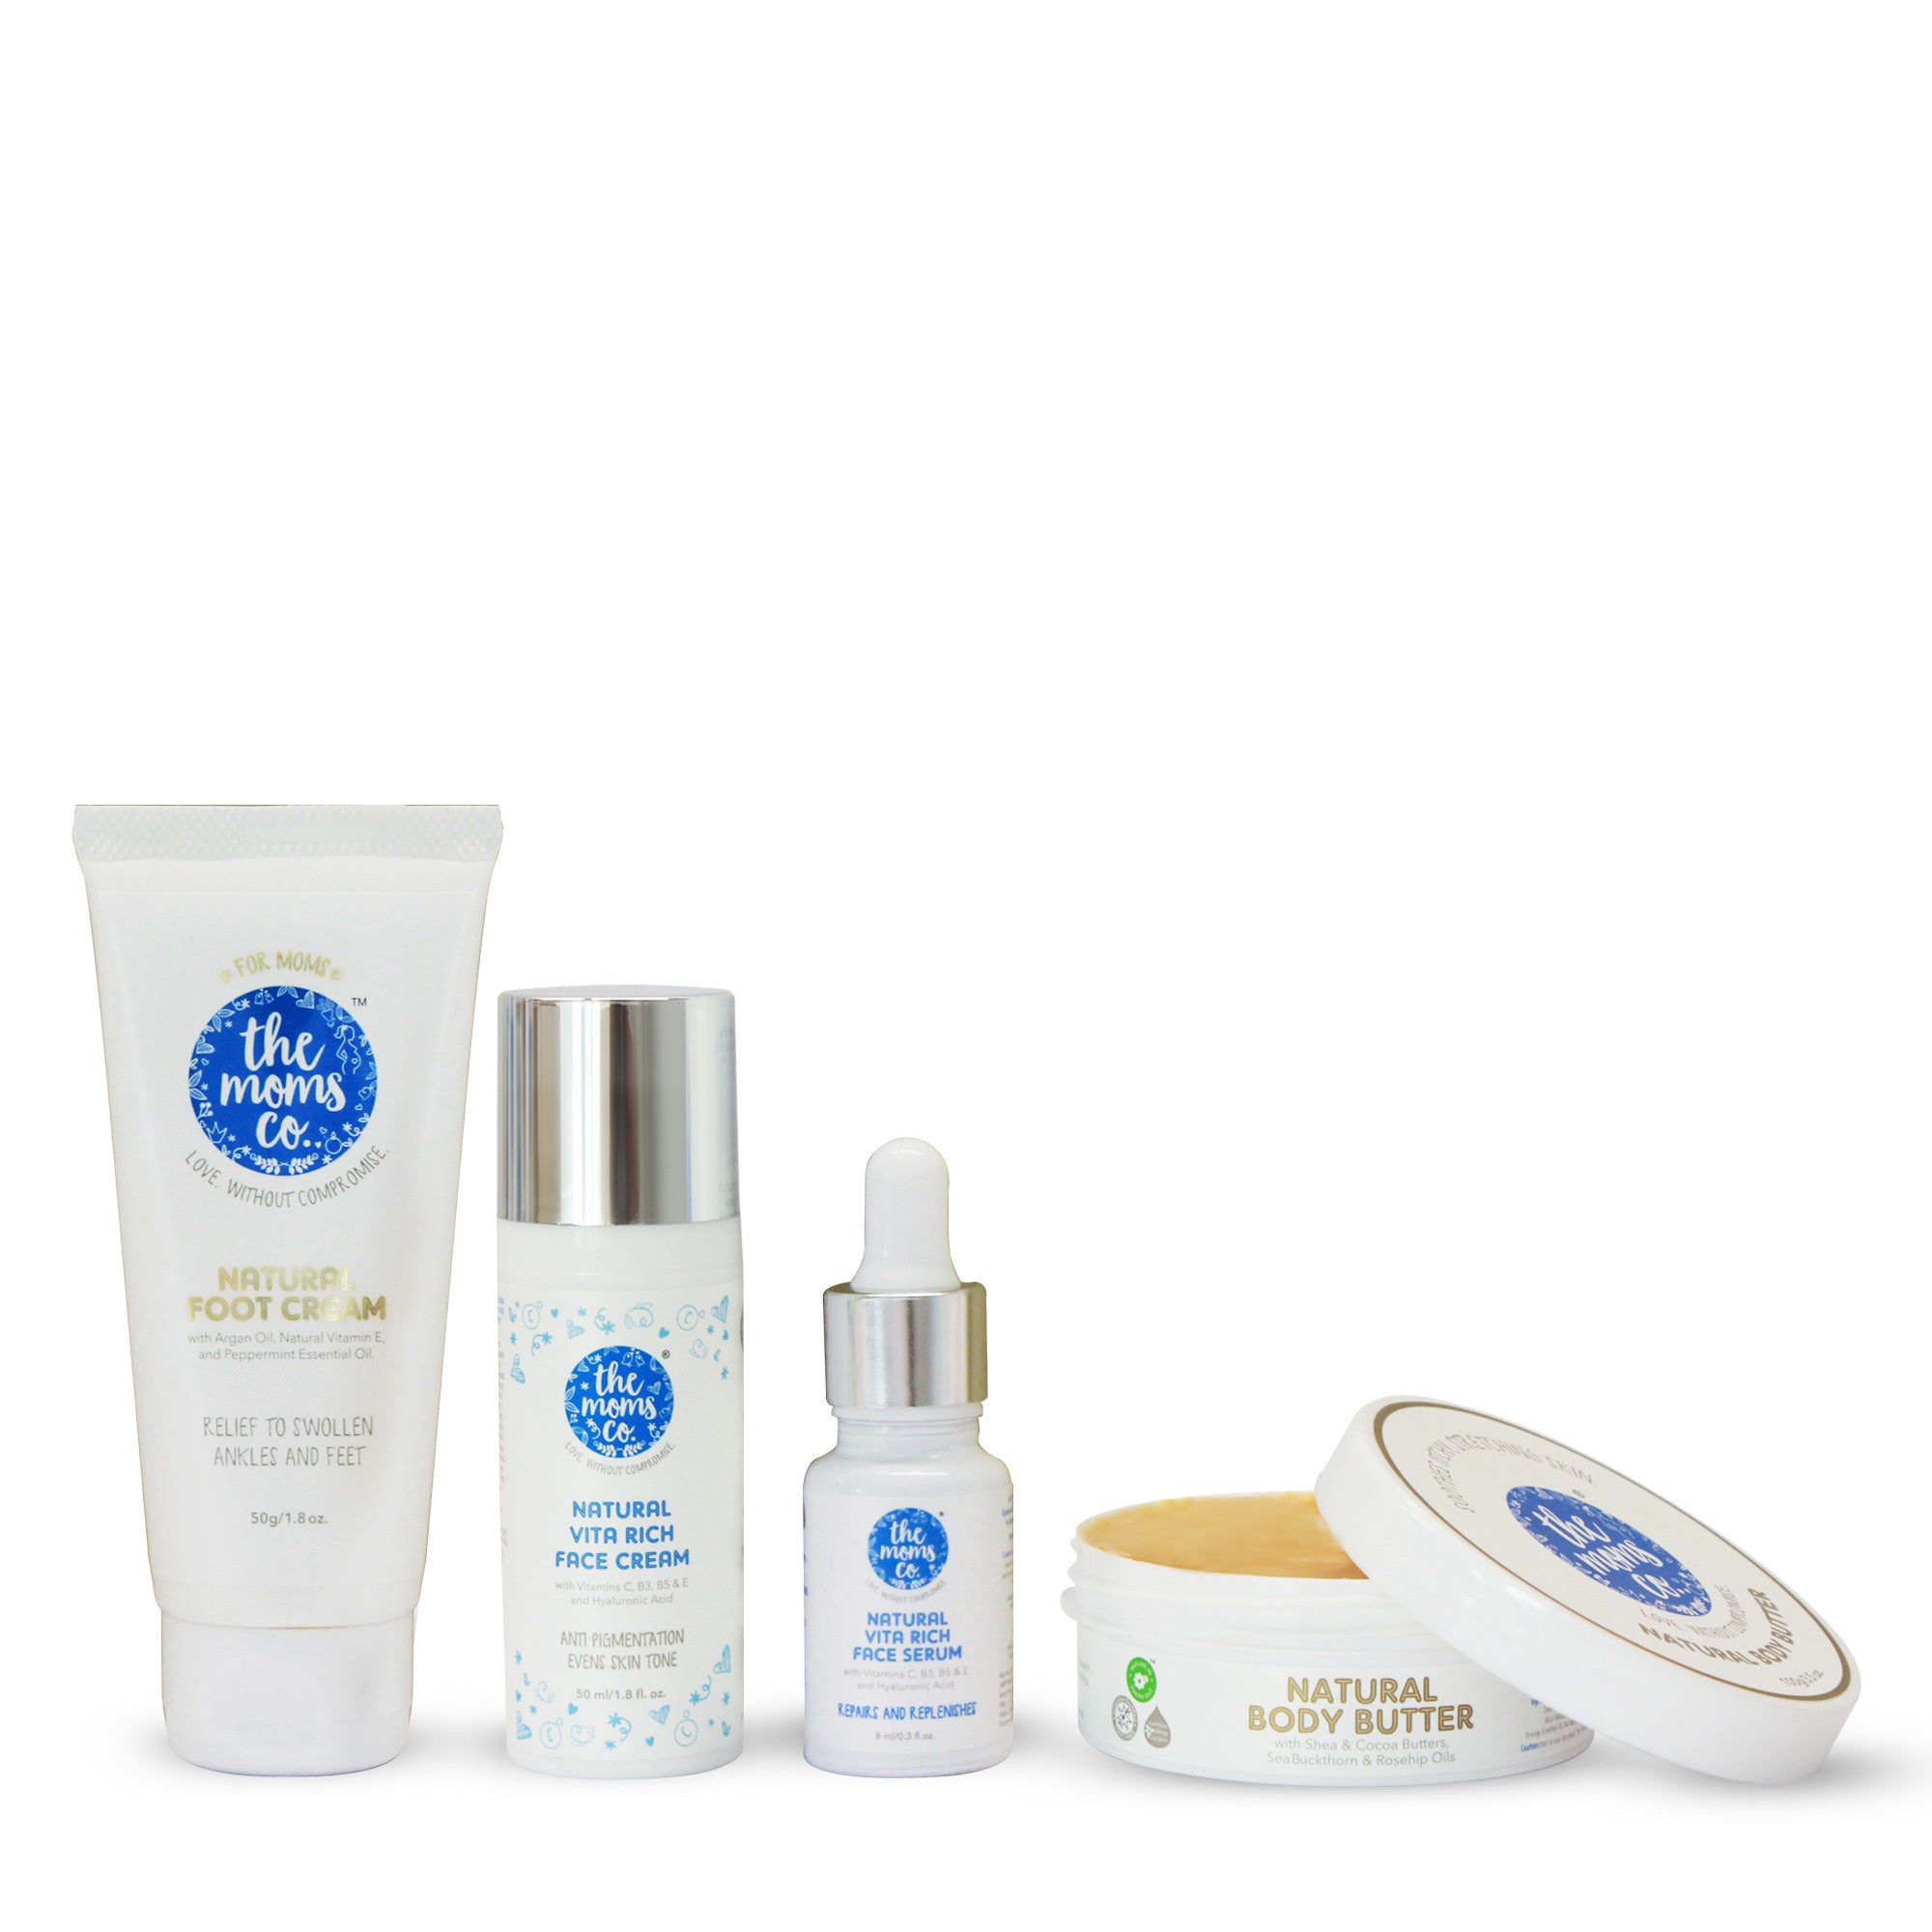 The Moms Co Complete Winter Care Set - For Nourished & Moisturized Skin with Cocoa & Shea Butter and Hyaluronic acid